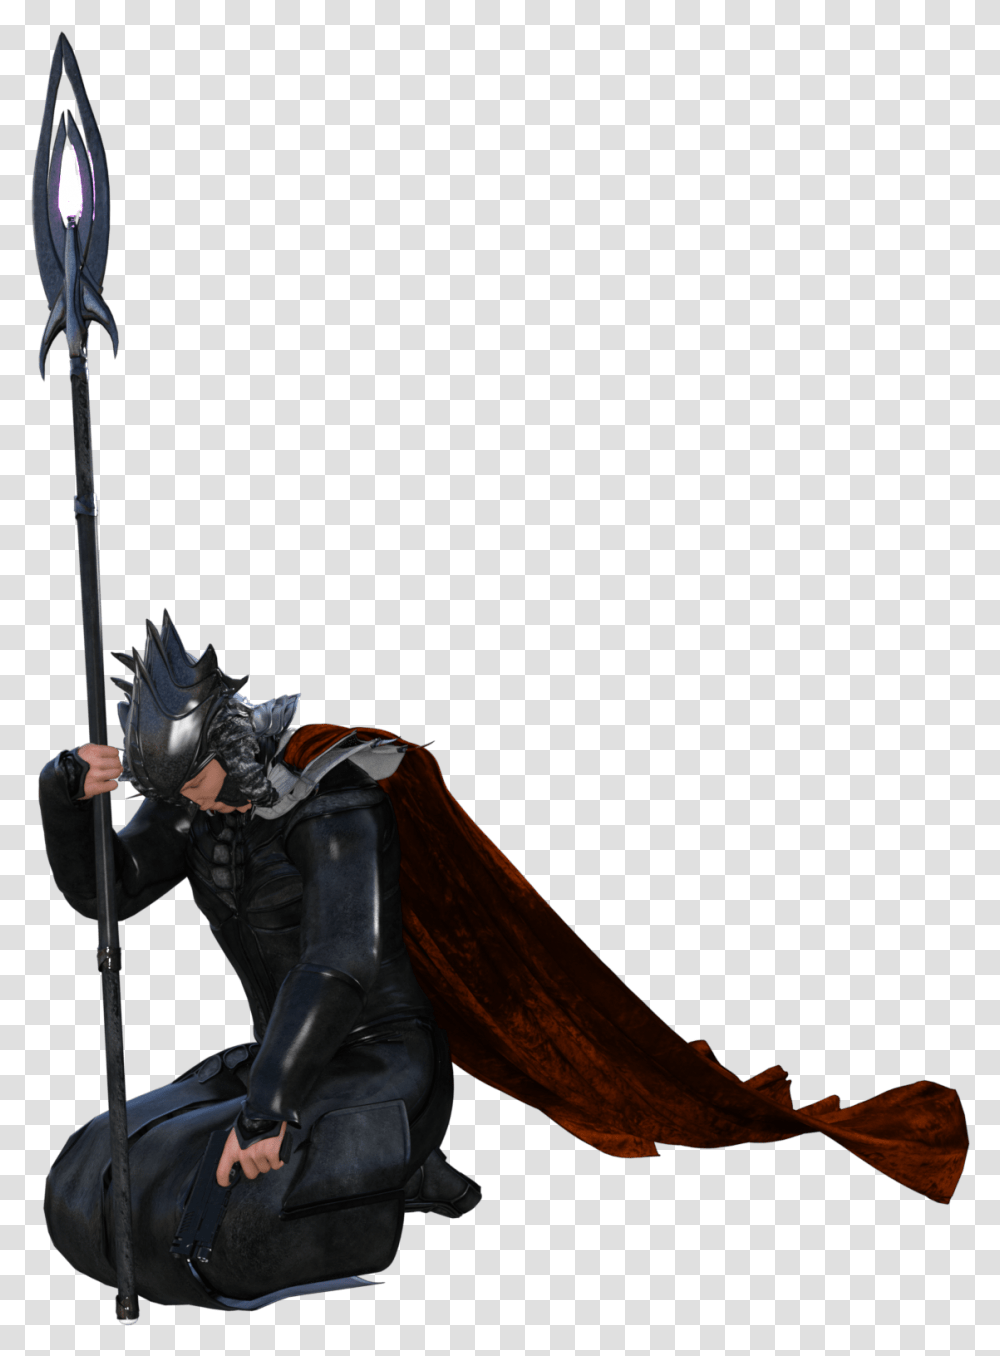 Pathfinder Cleric Spear Cleric With Spear, Person, Human, Costume, Knight Transparent Png